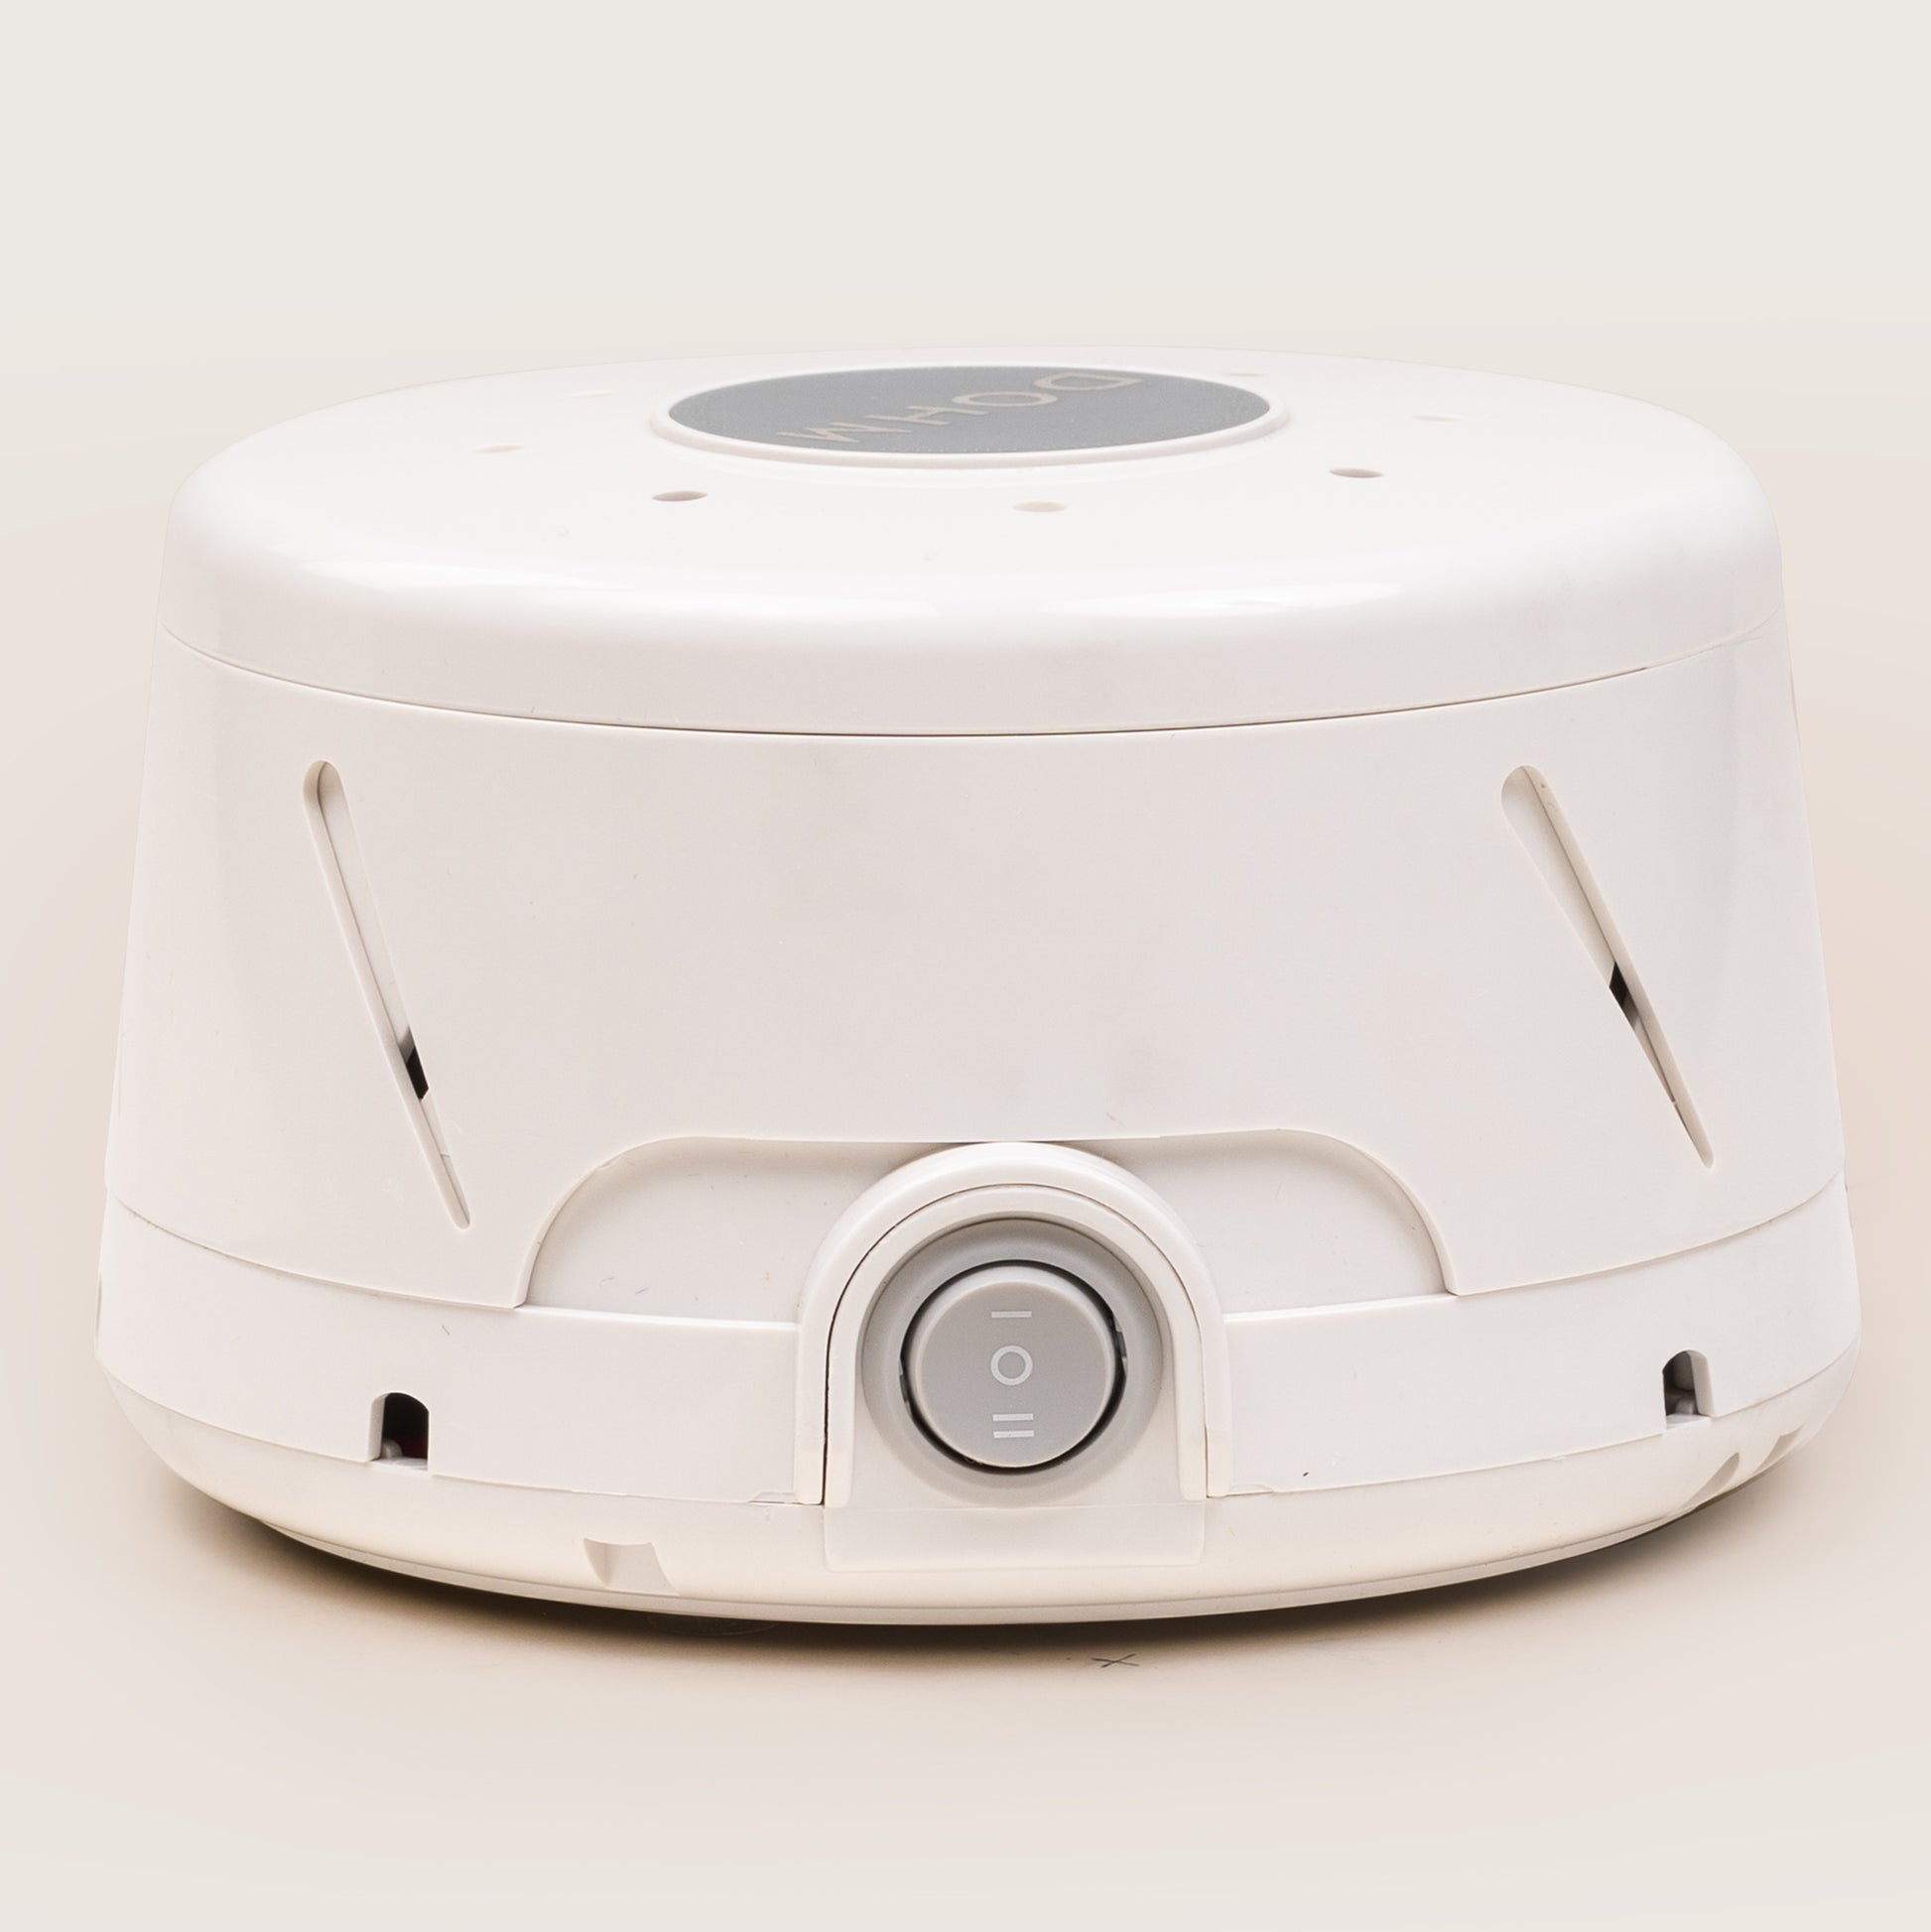 White Noise Machine: Sound Generator for Office & Homes